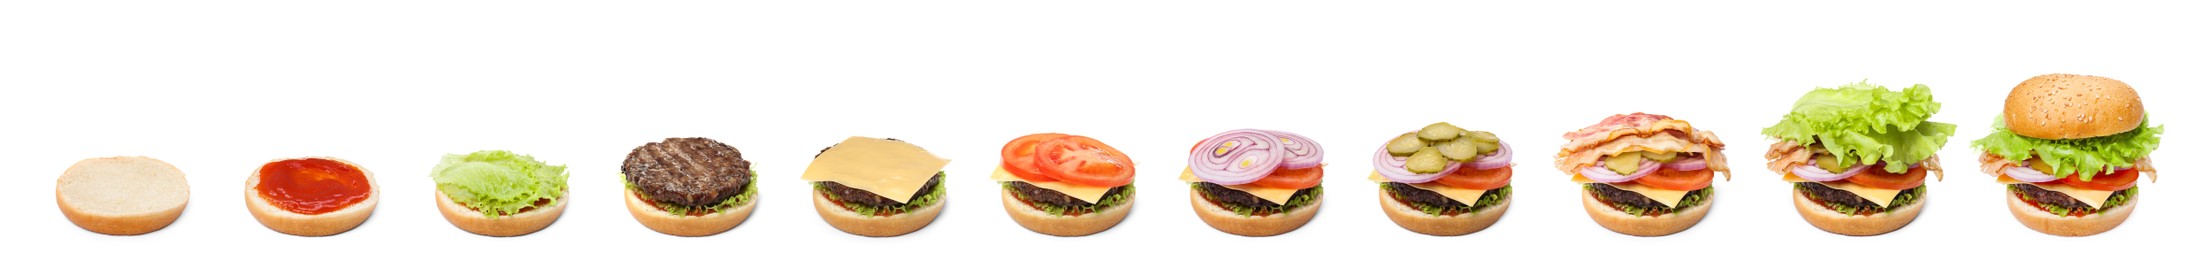 Image of Step by step burger making on white background. Collage design